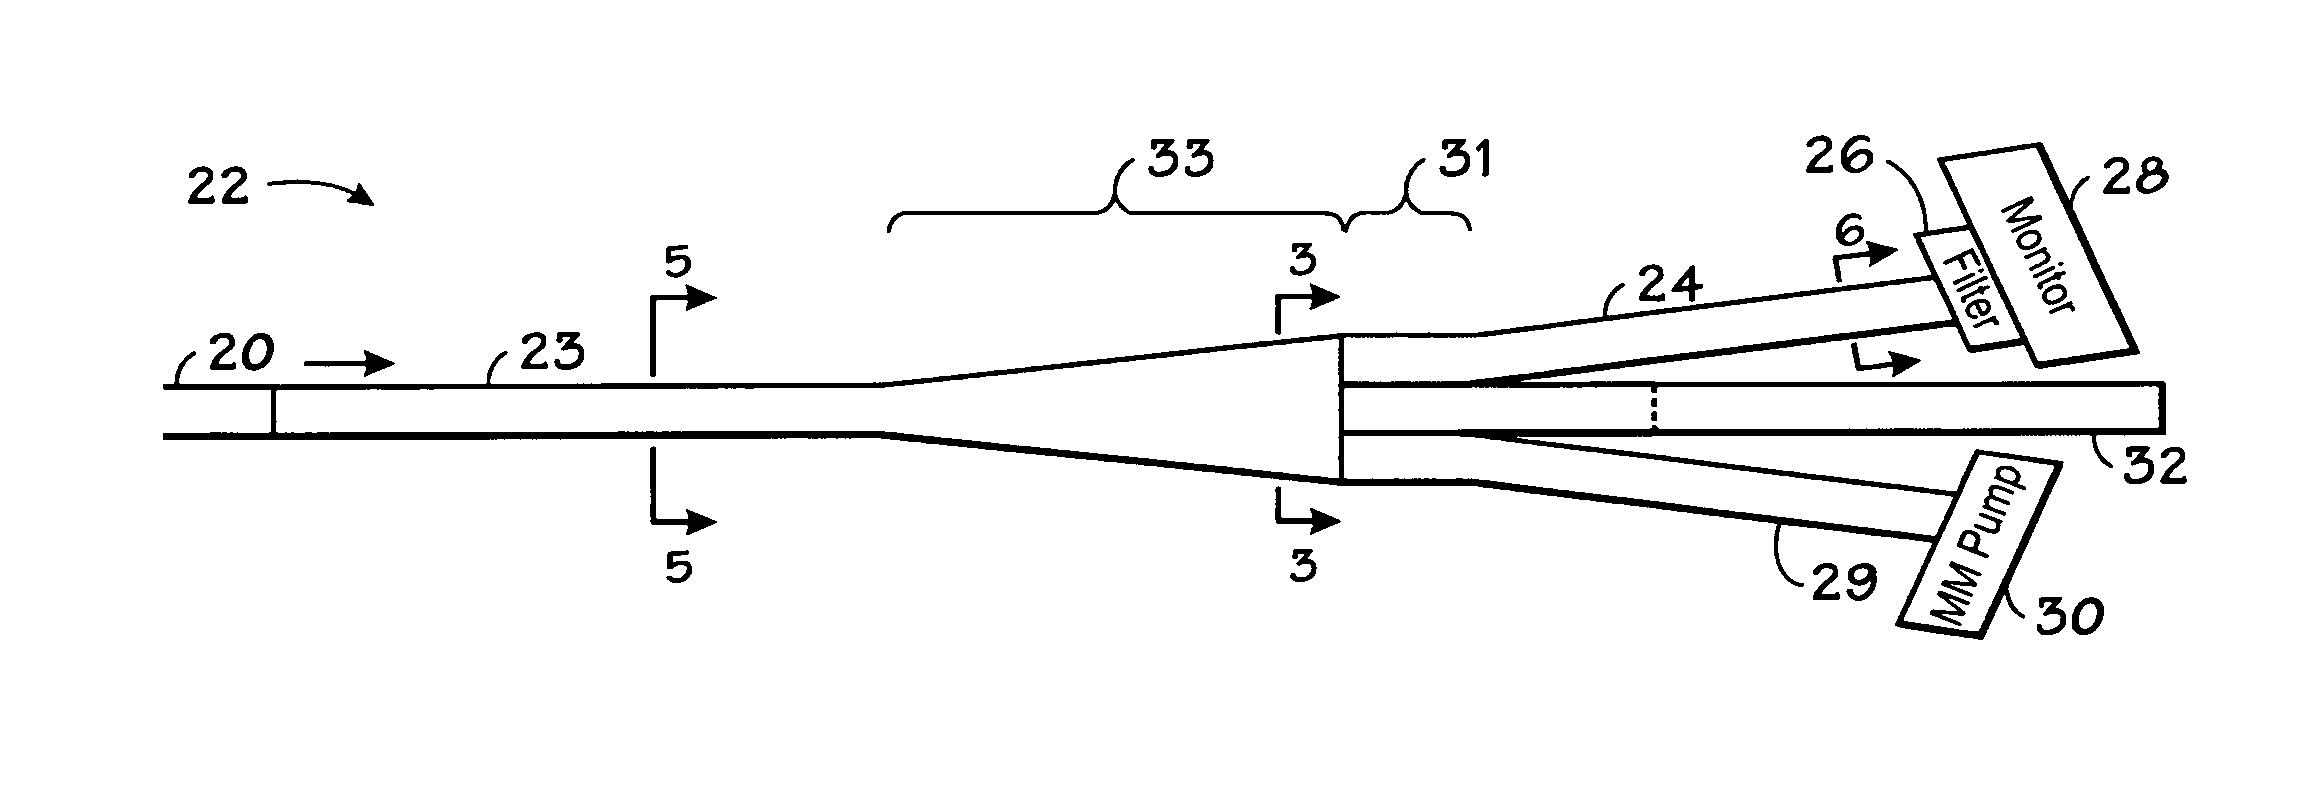 Tapered fiber bundle apparatus with monitoring capability